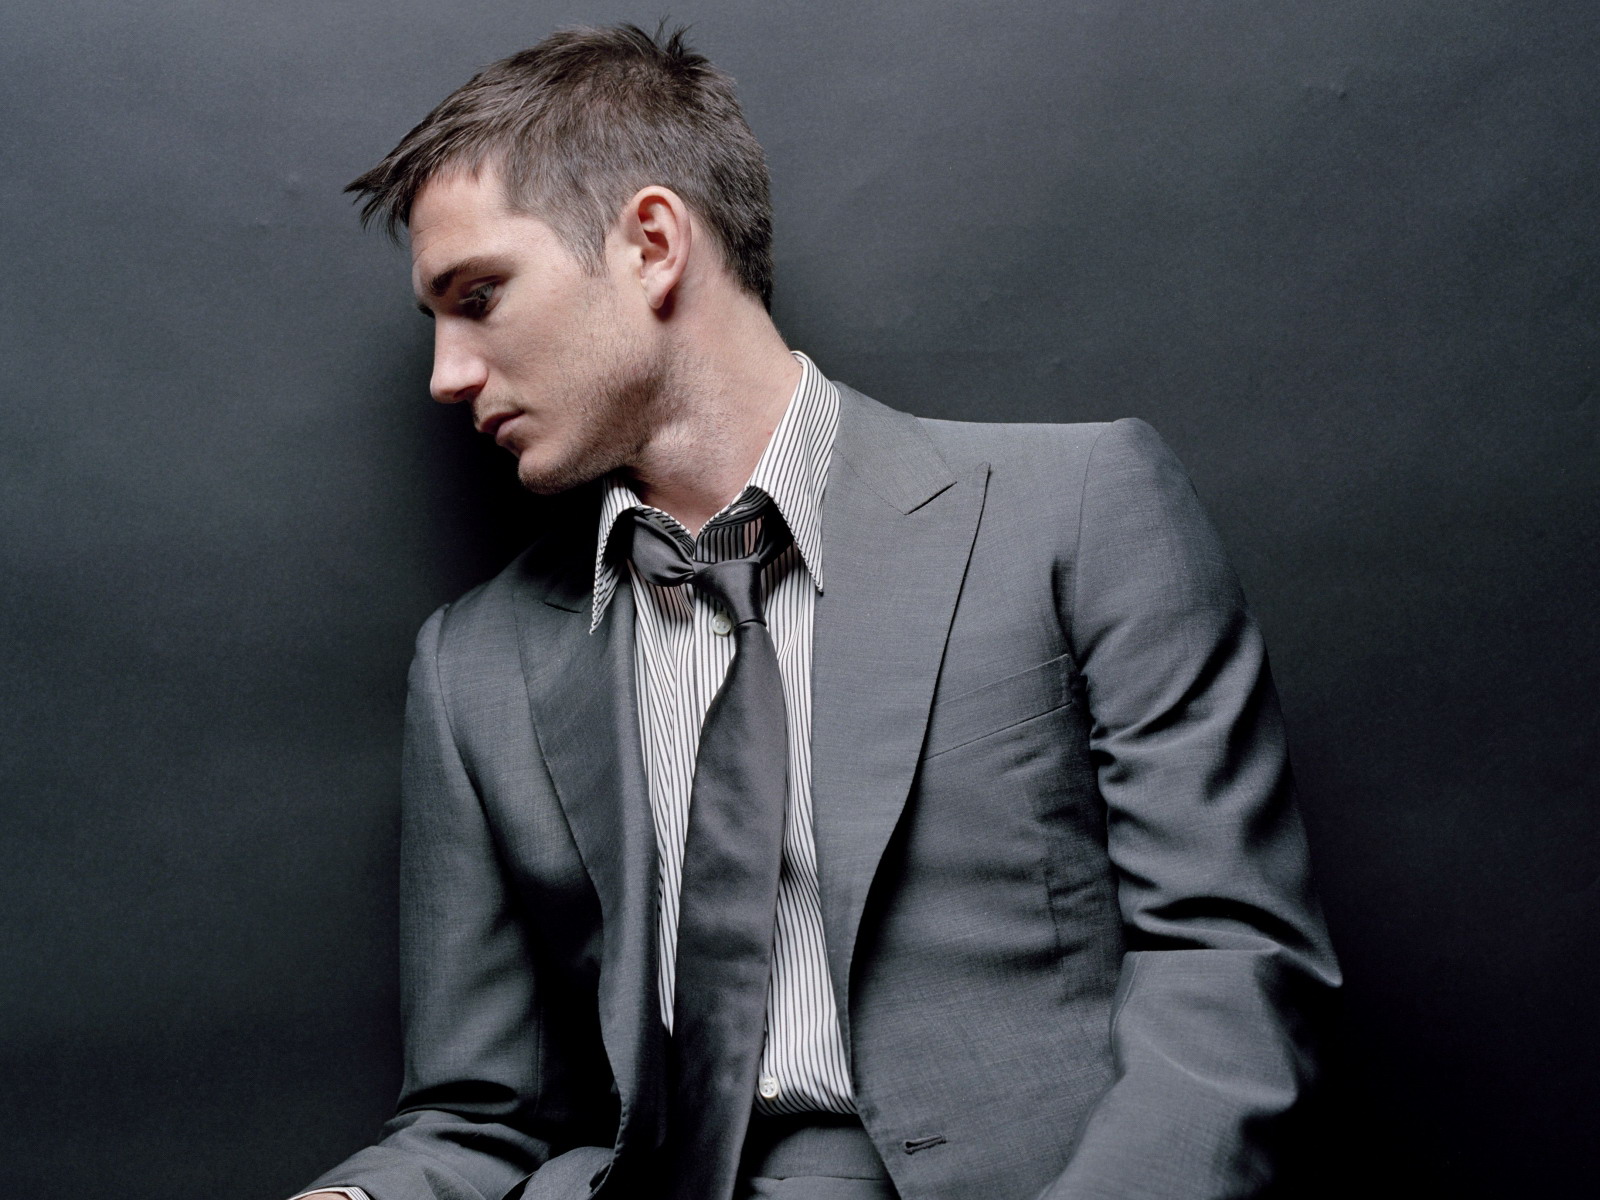 Frank_Lampard_Unknown_photoshoot